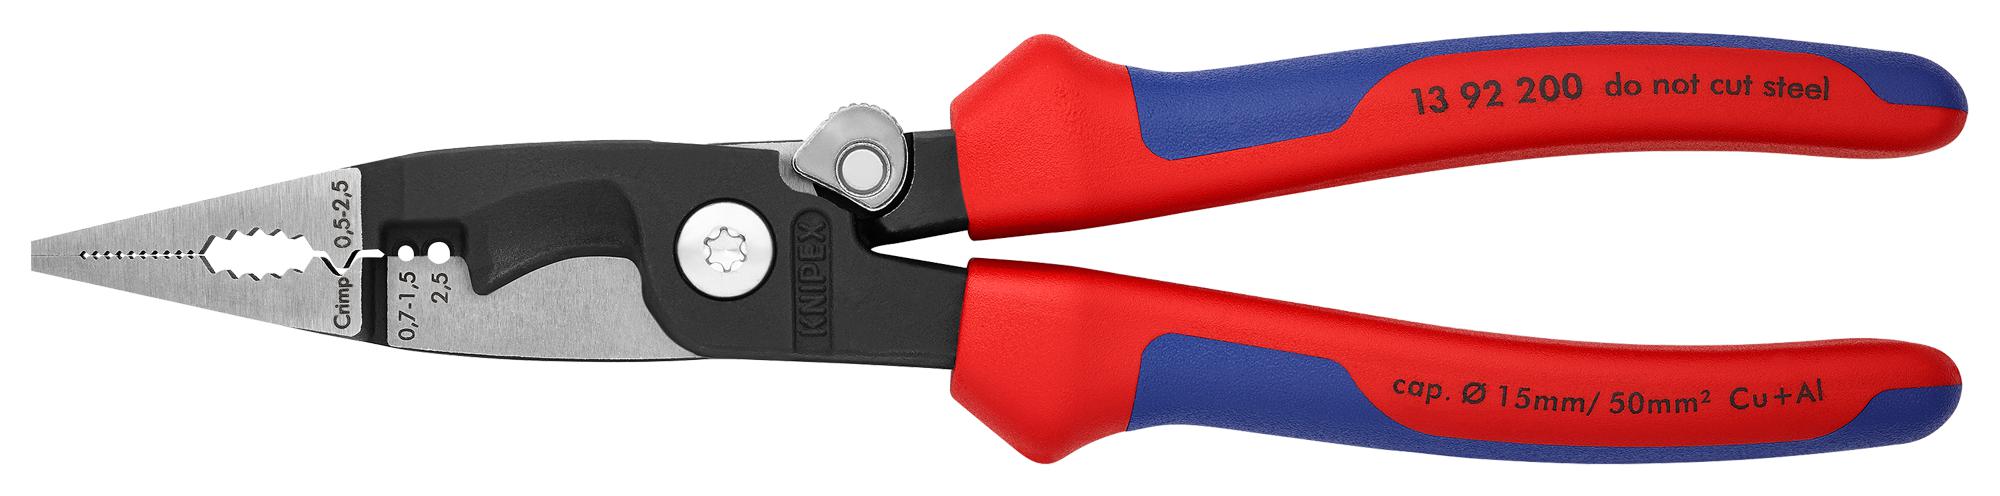 13 92 200 PLIER / CUTTER, ELECTRICIAN KNIPEX